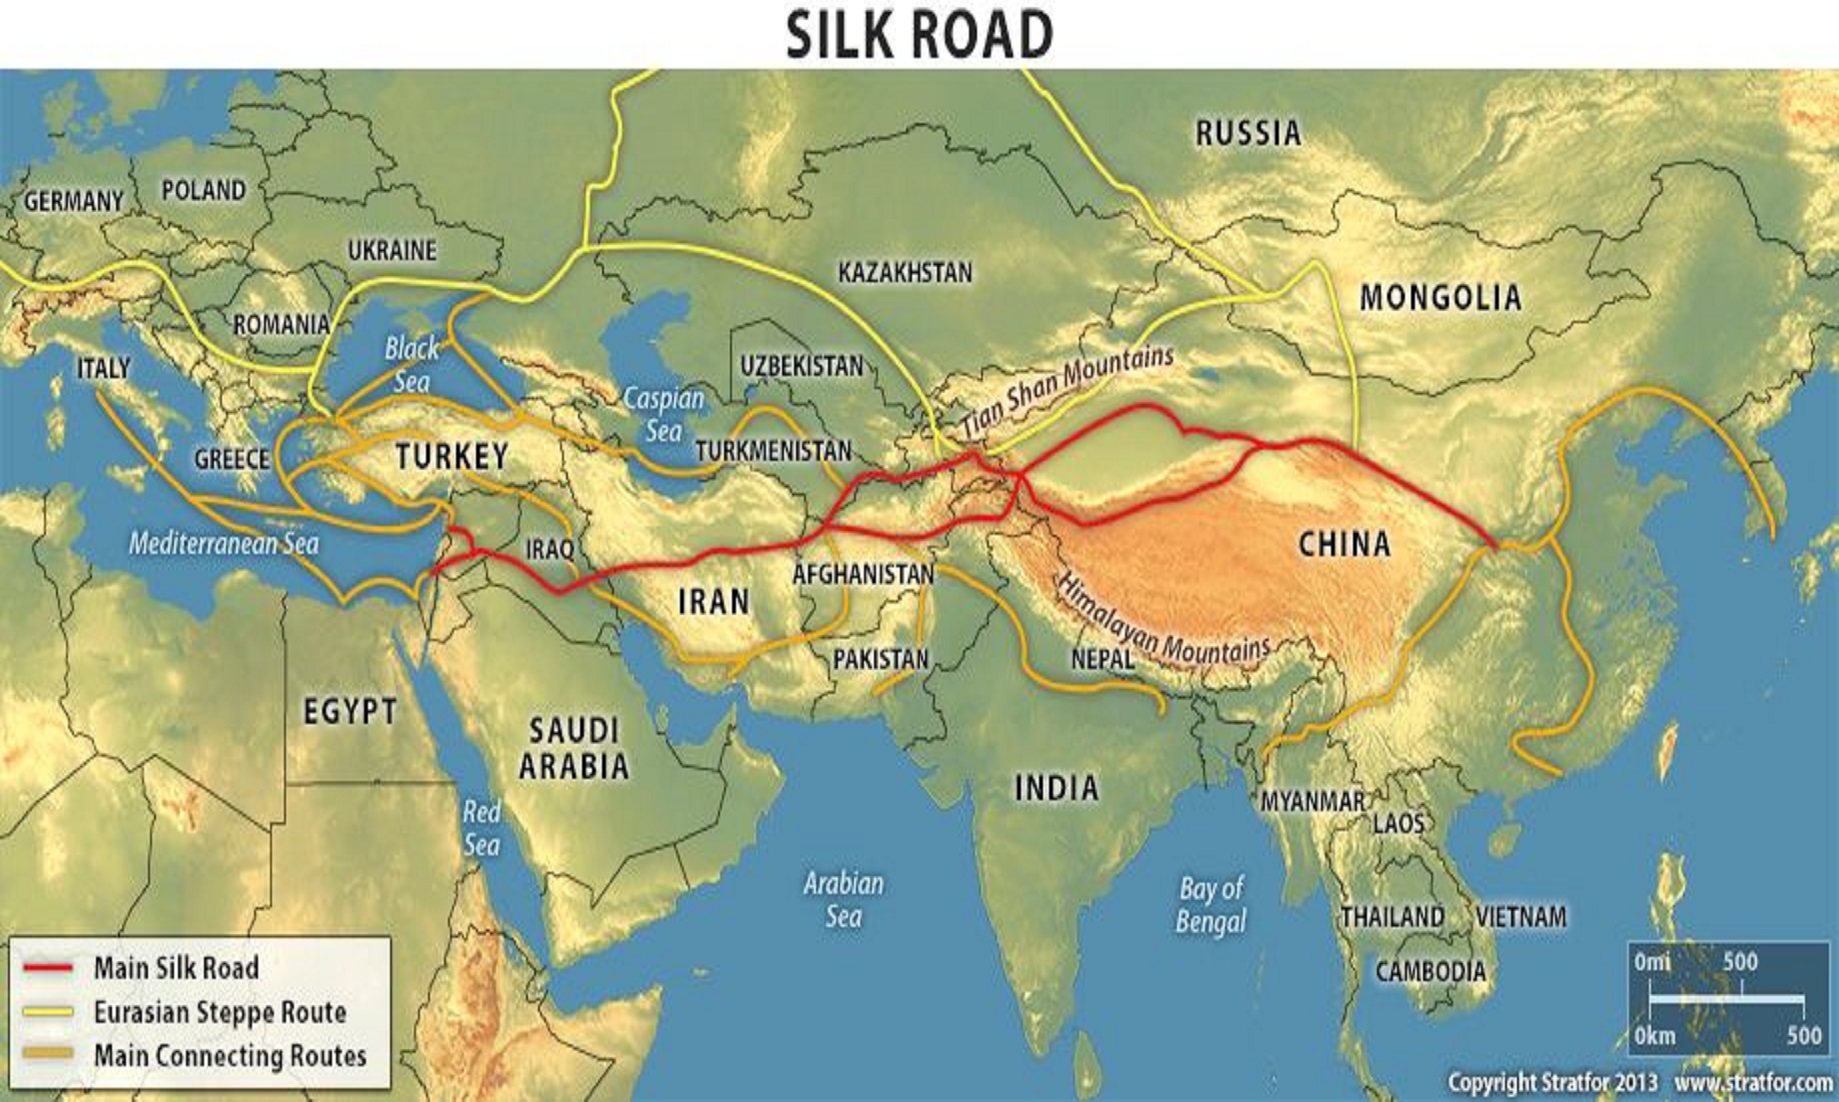 Revival Of Ancient Silk Road To Strengthen Regional Connectivity: Pakistani Envoy